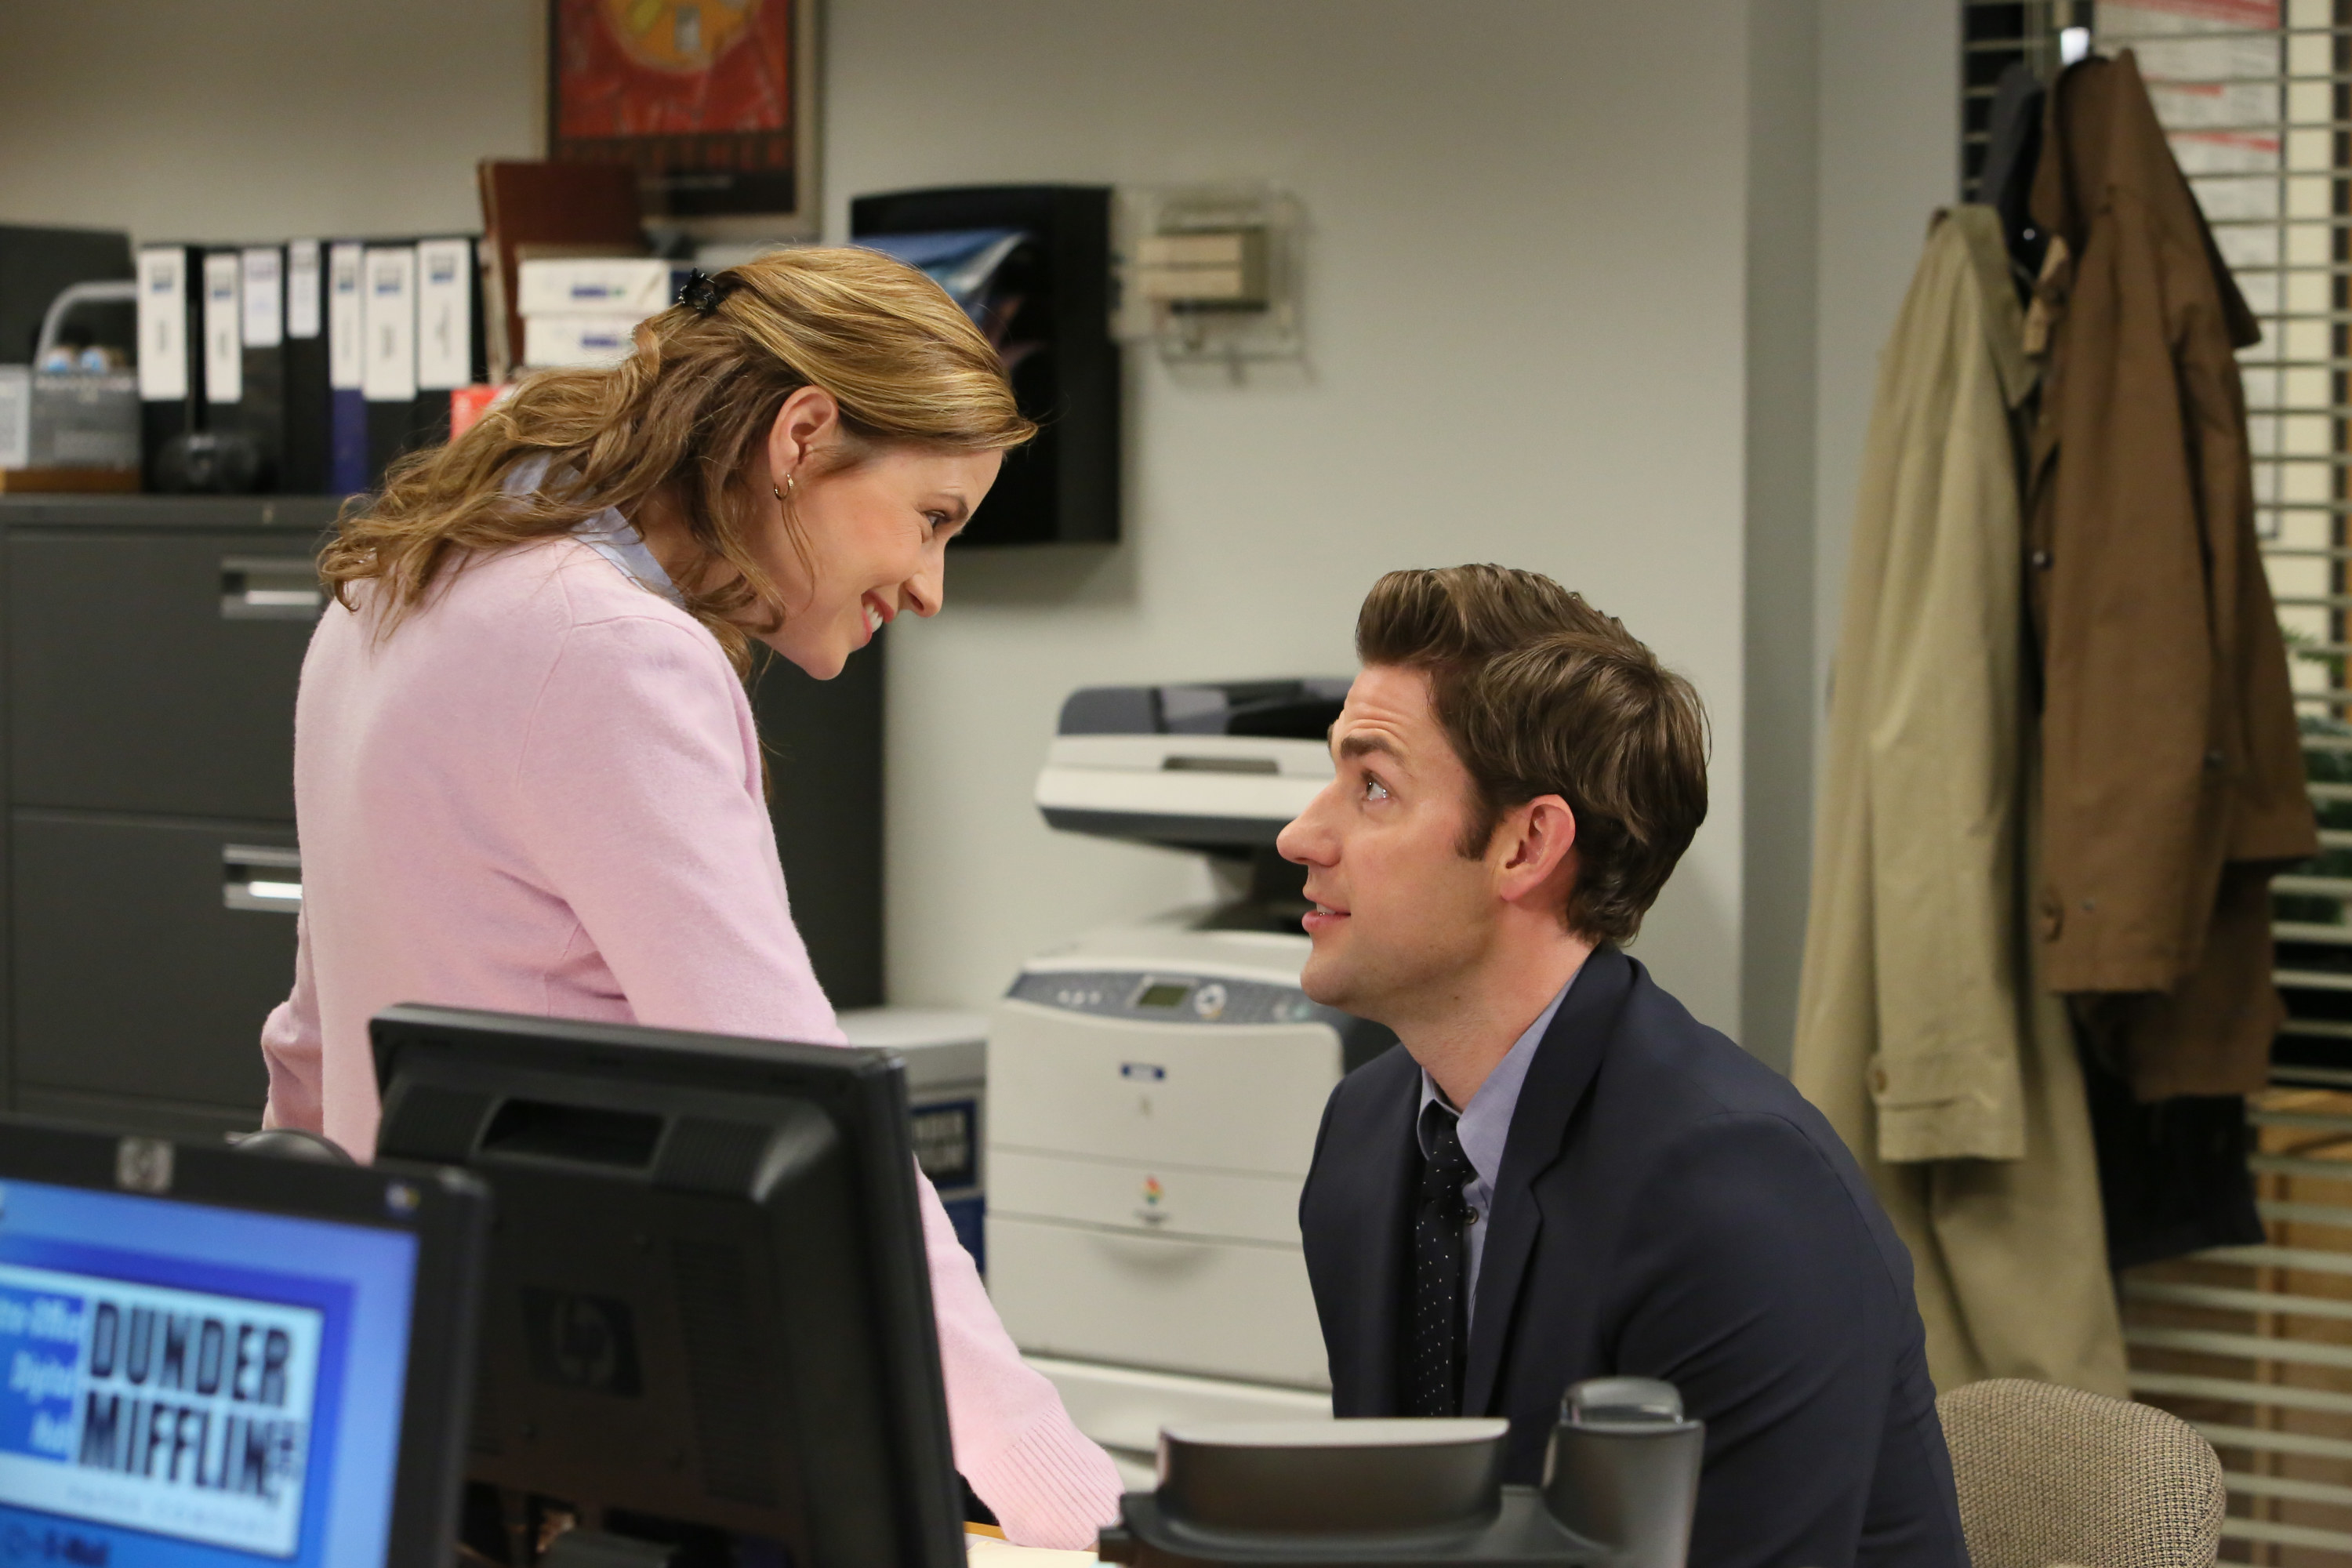 Jim and Pam look at each other in the office